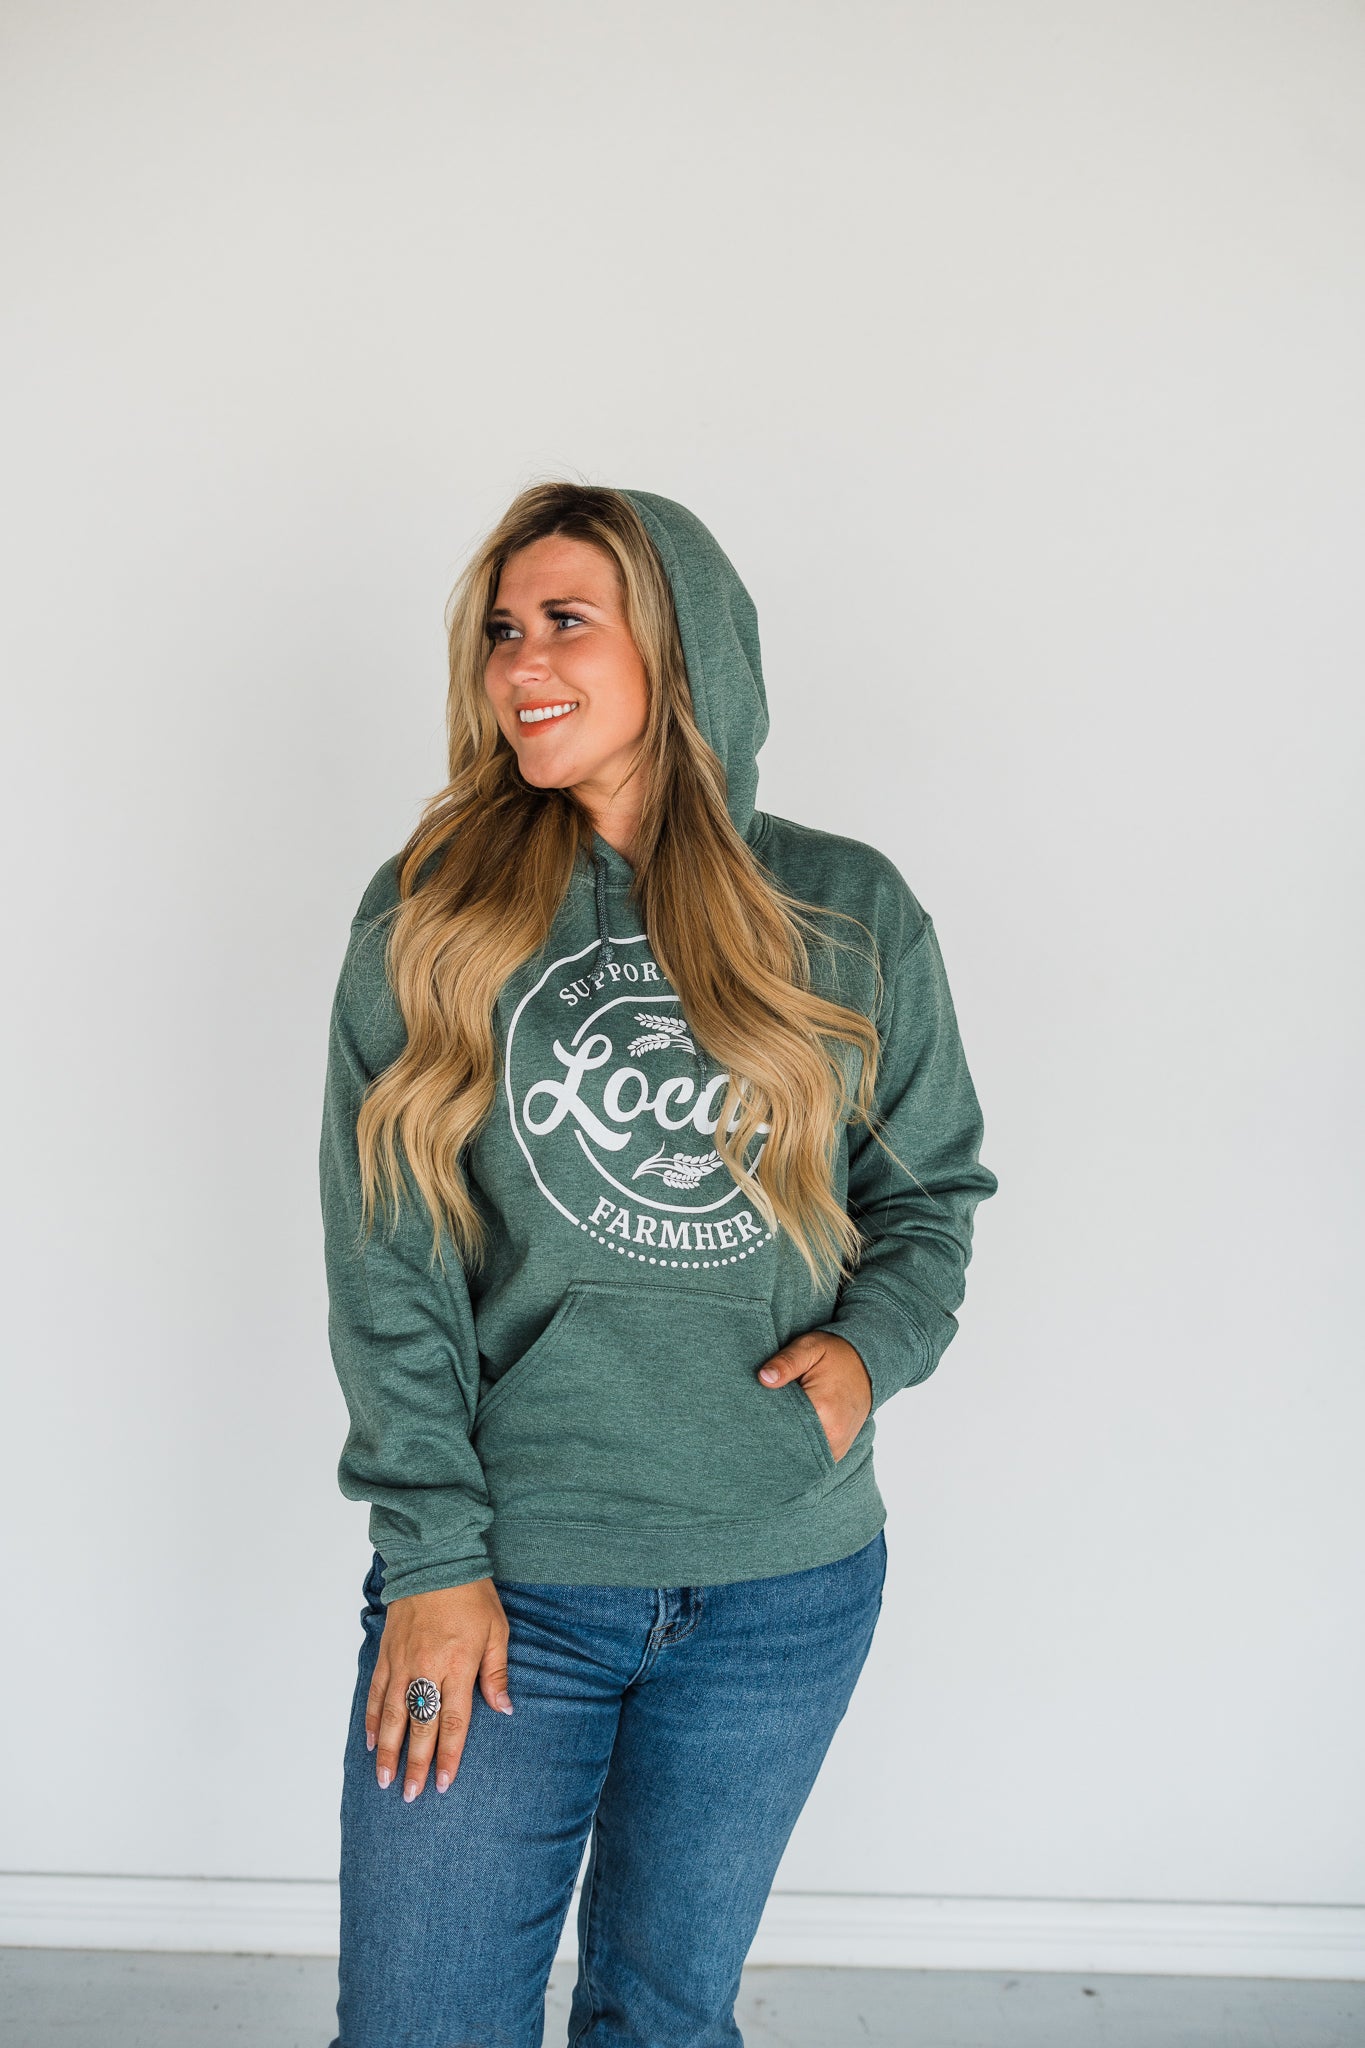 "Support Your Local FarmHer" Sweatshirt